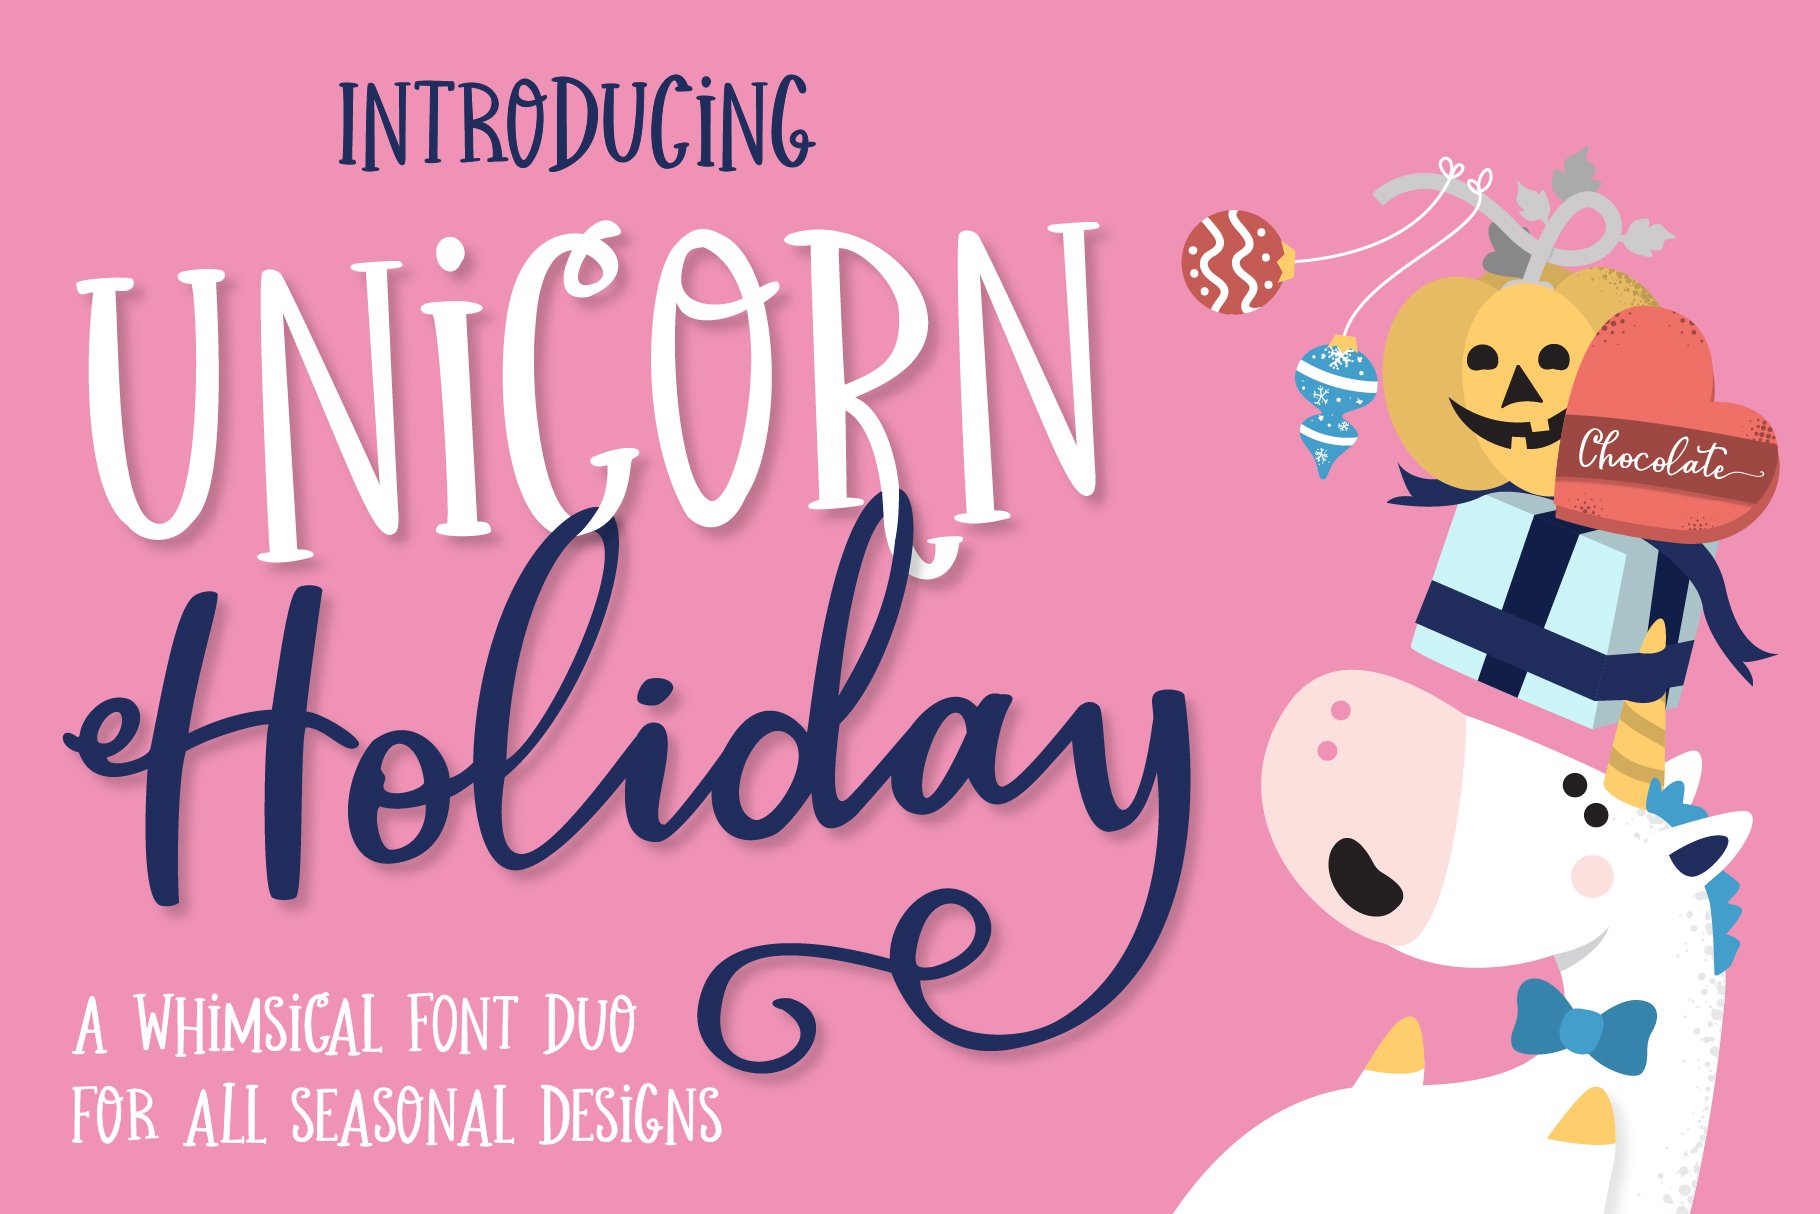 Unicorn Holiday Font Duo cover image.